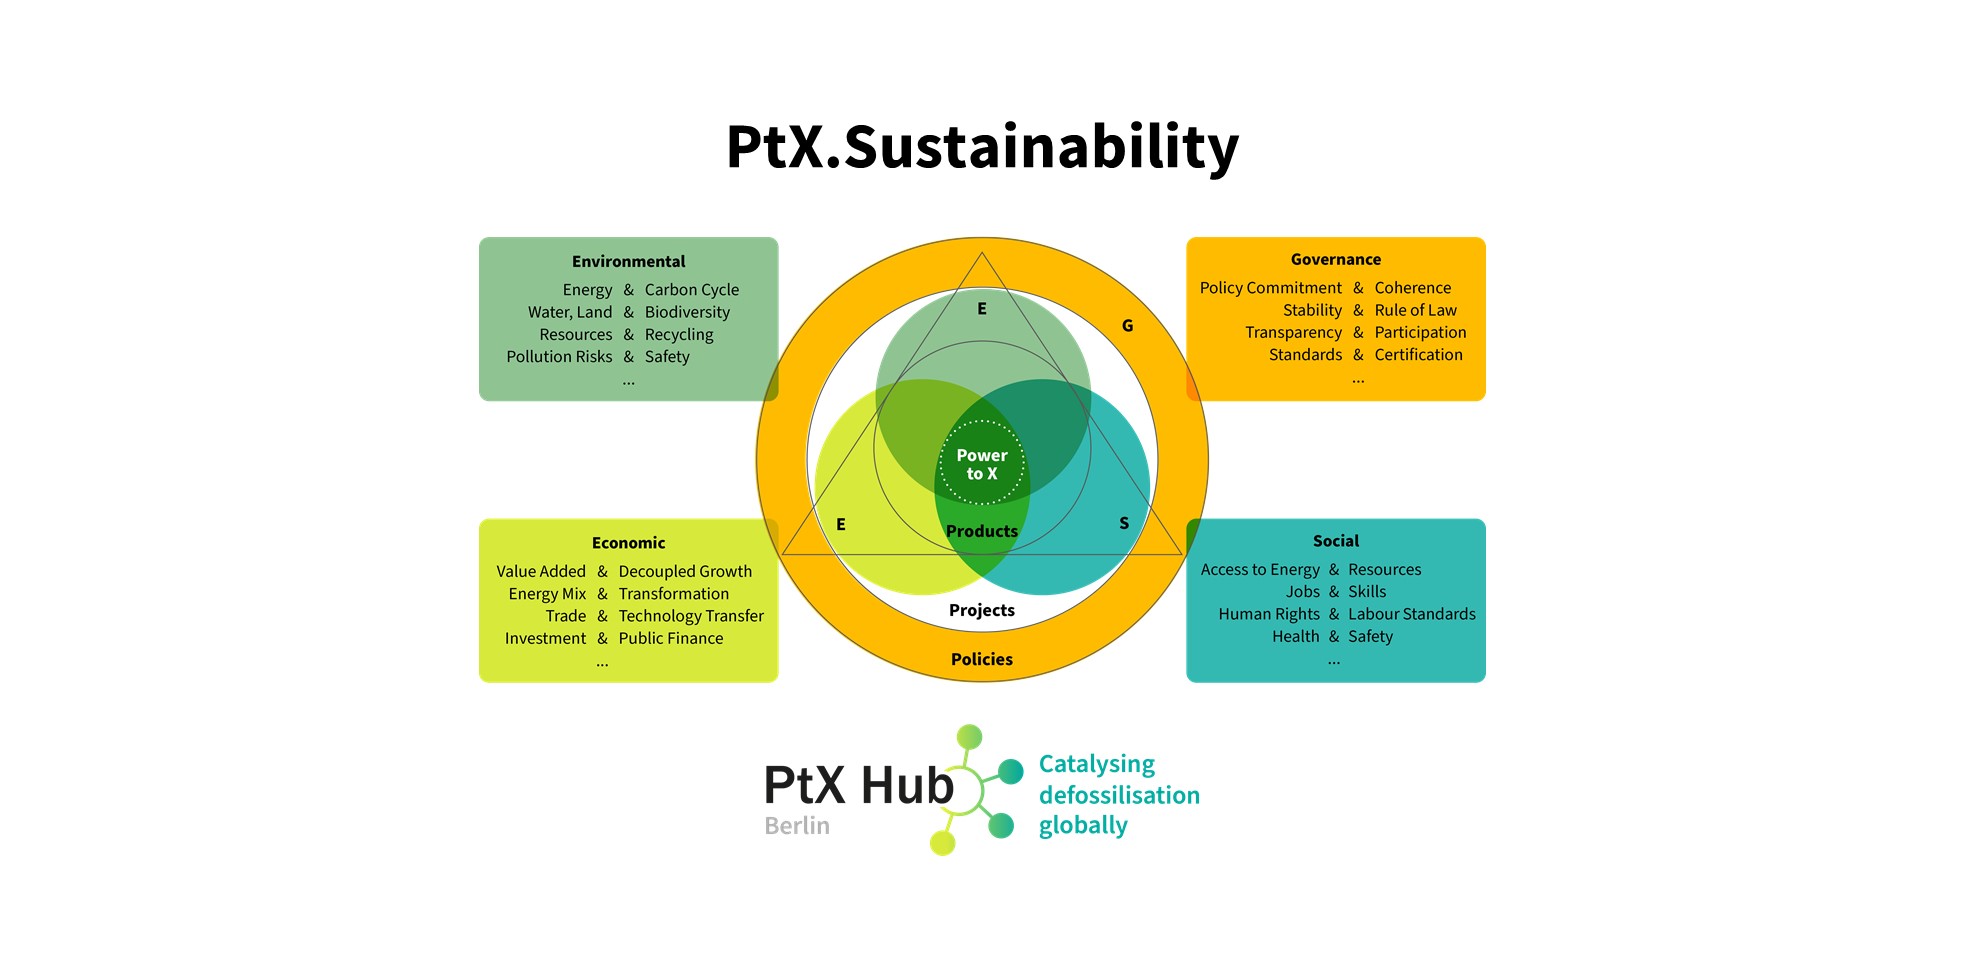 PtX.Sustainability Scoping Paper EESG Framework Environmental Economic Governance Social Dimensions and Concerns as Graphic Illustration